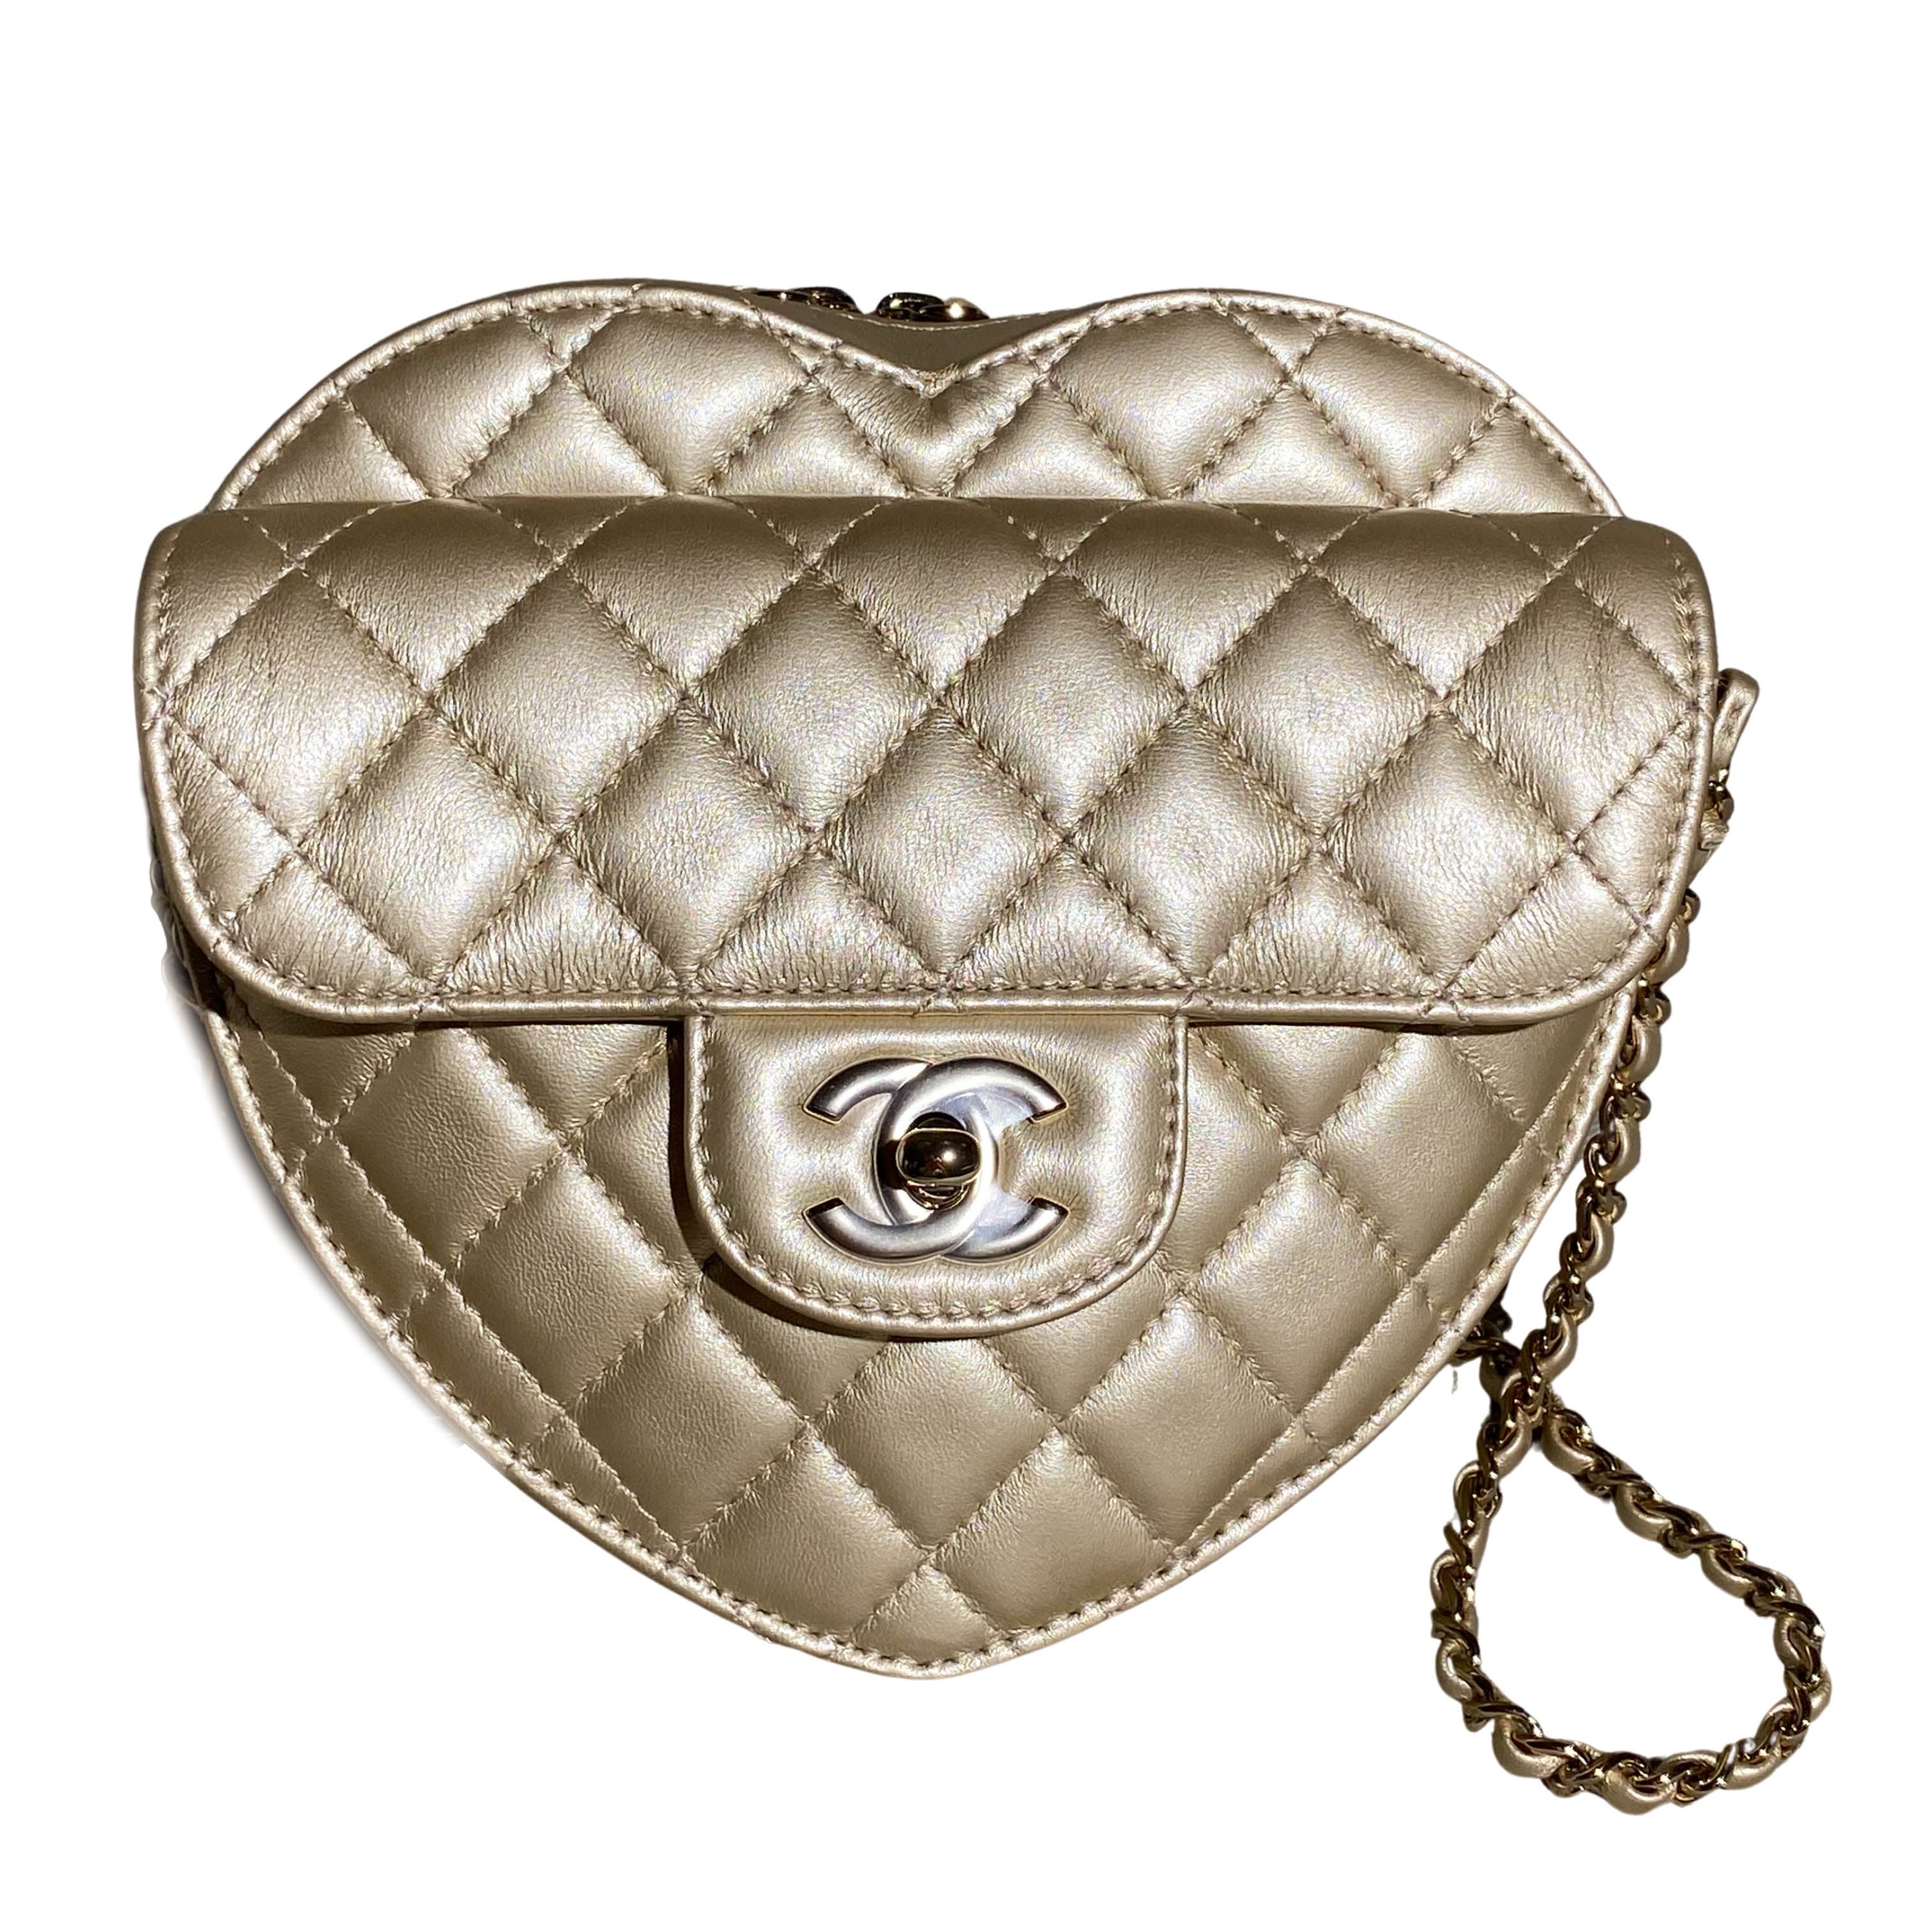 CHANEL HEART BAG PRICE REVEALED! CHANEL 22S HEART BAG PRICE LIST +